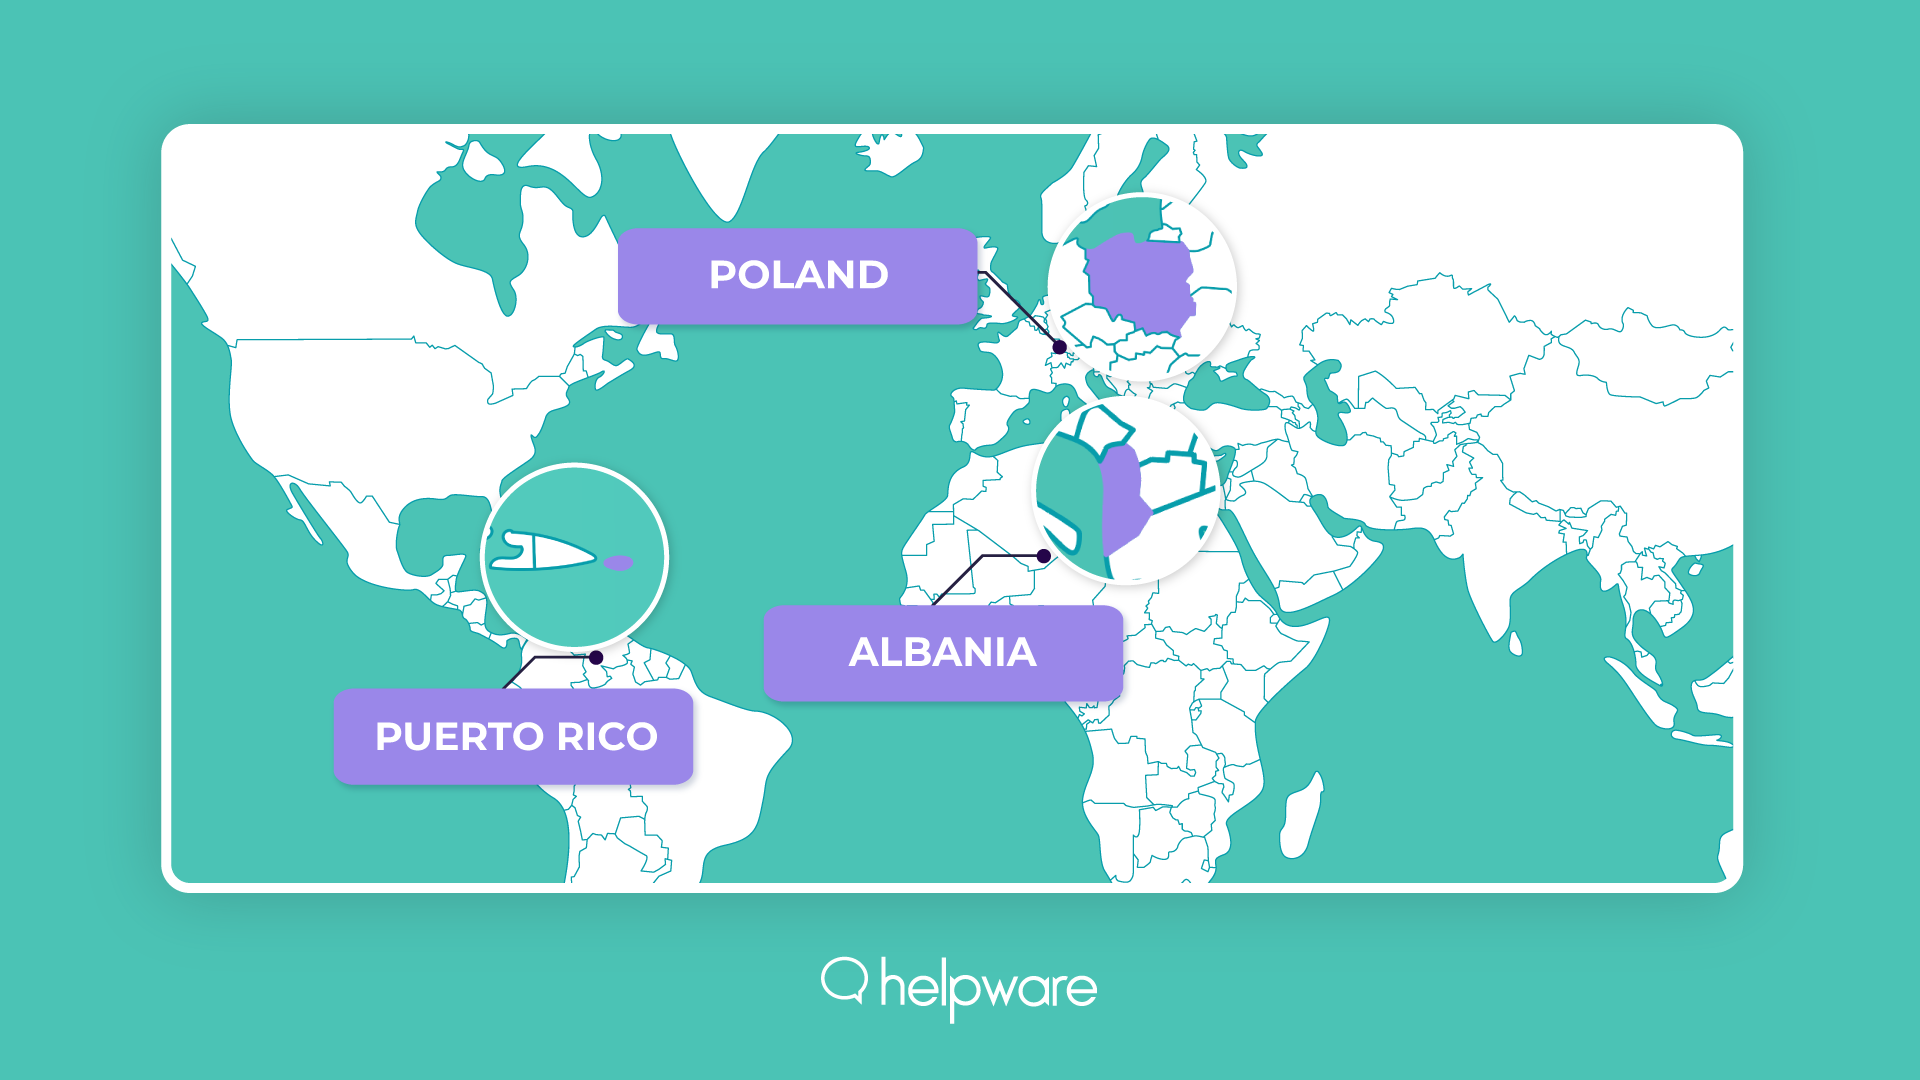 Driving the Success: Helpware Expands Its Operations to Poland, Albania, and Puerto Rico